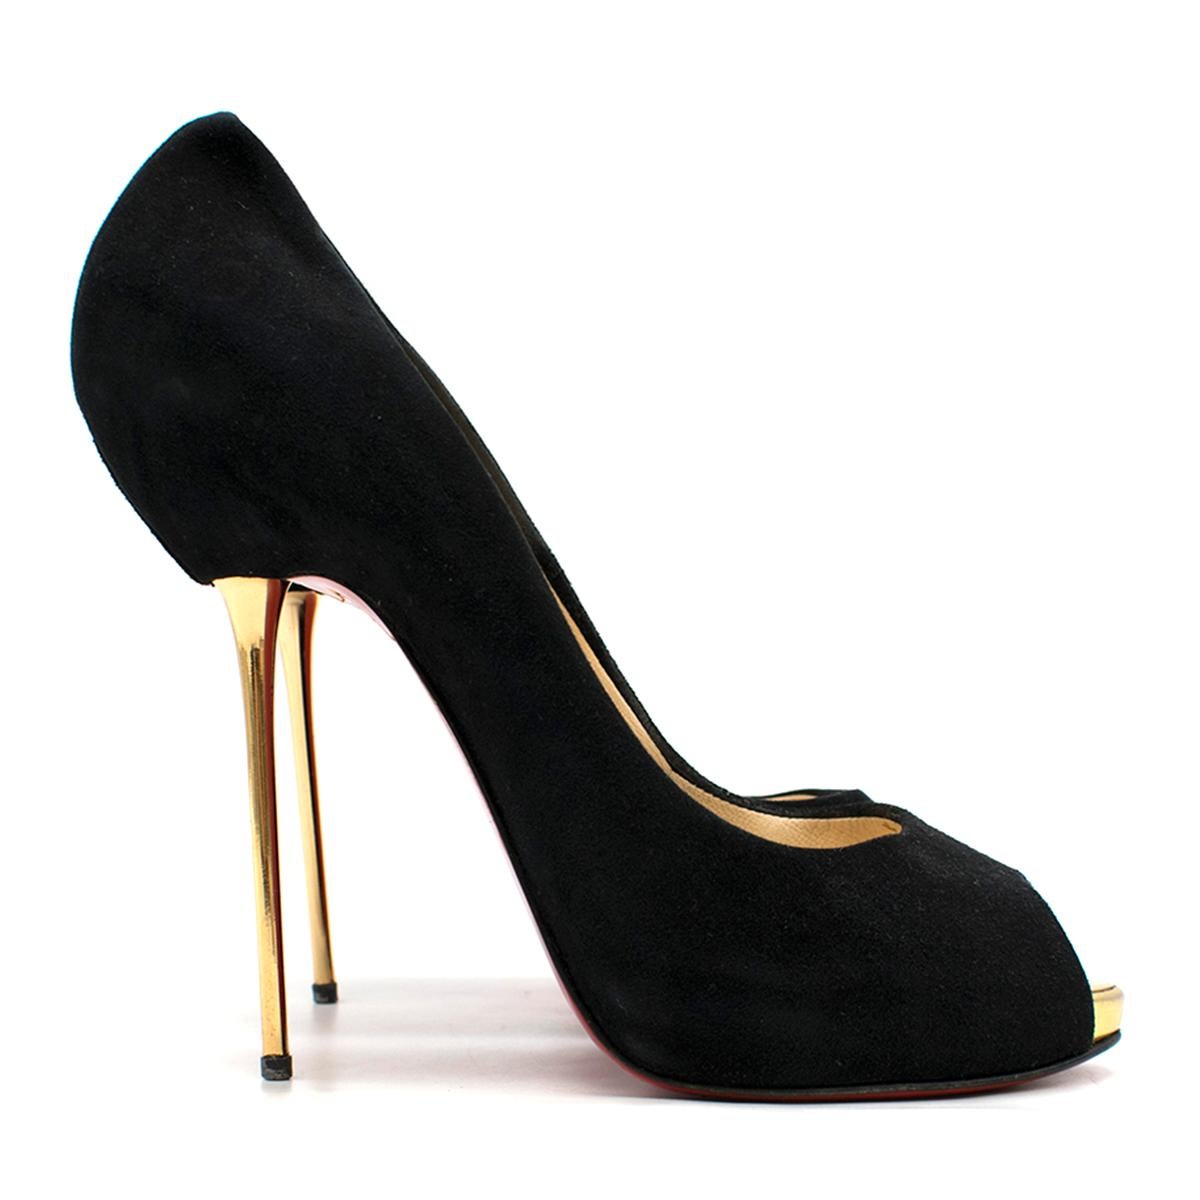 Christian Louboutin Black Metallic Peeptoe Heels

-Black peeptoe heels
-Gold tone metal stiletto heels
-Gold tone platforms
-High stilettos with small platforms

Please note, these items are pre-owned and may show signs of being stored even when